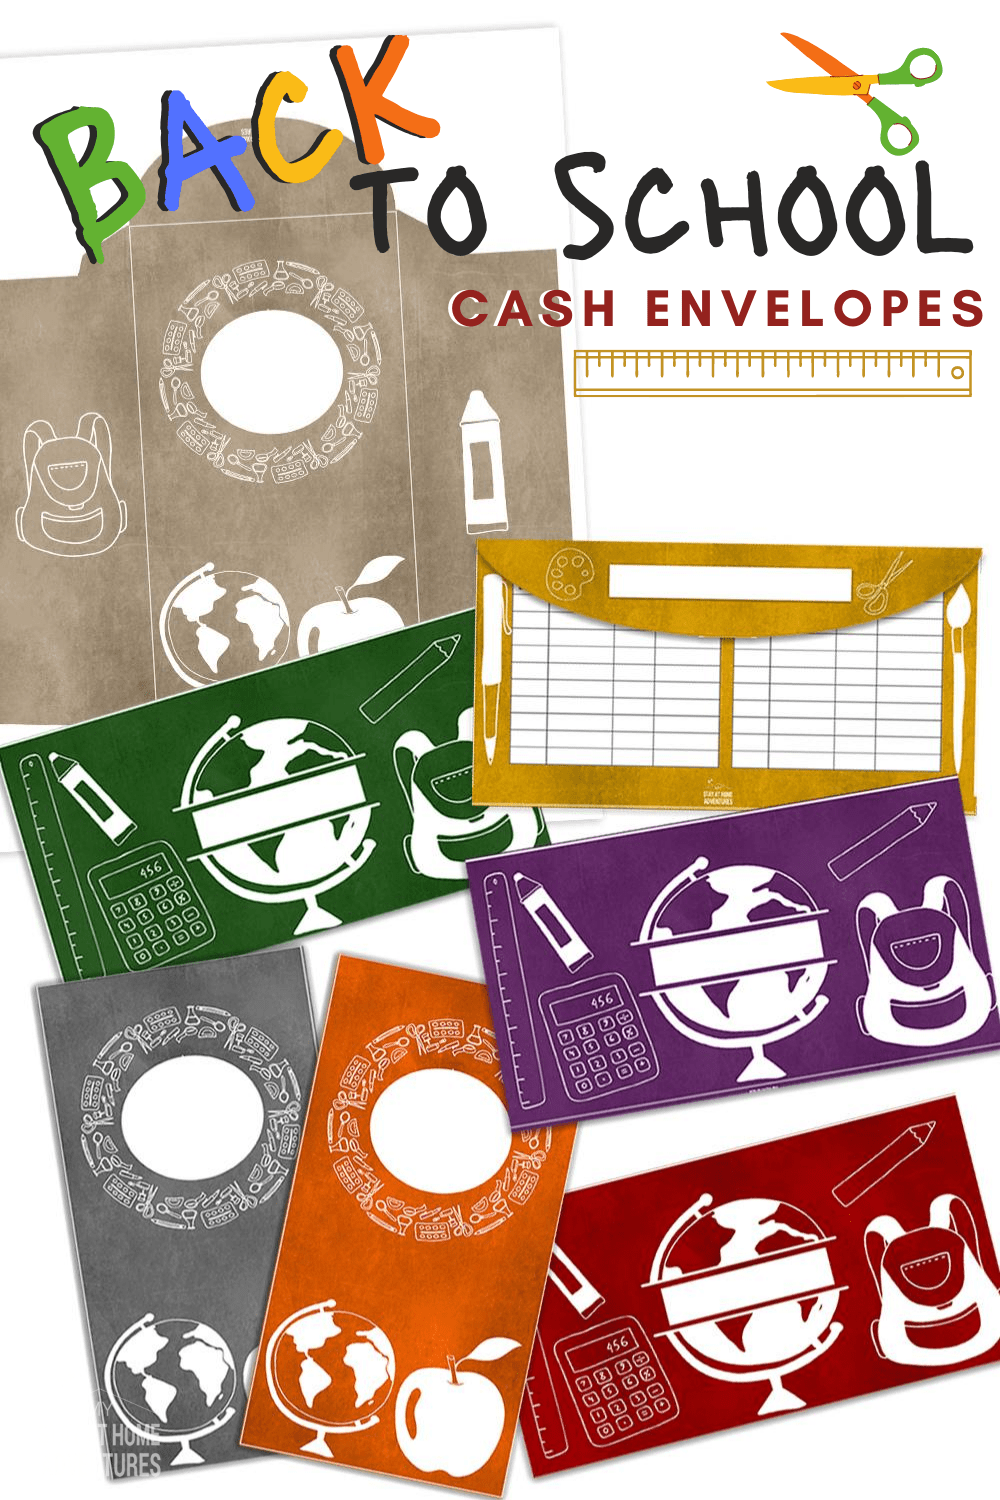 Cash budgeting doesn't have to be boring! Back to School cash envelopes are colorful and comes in two styles: horizontal cash envelopes and vertical envelopes. #cashenvelopes #cashenvelopeprintables #cashbudgeting via @mystayathome